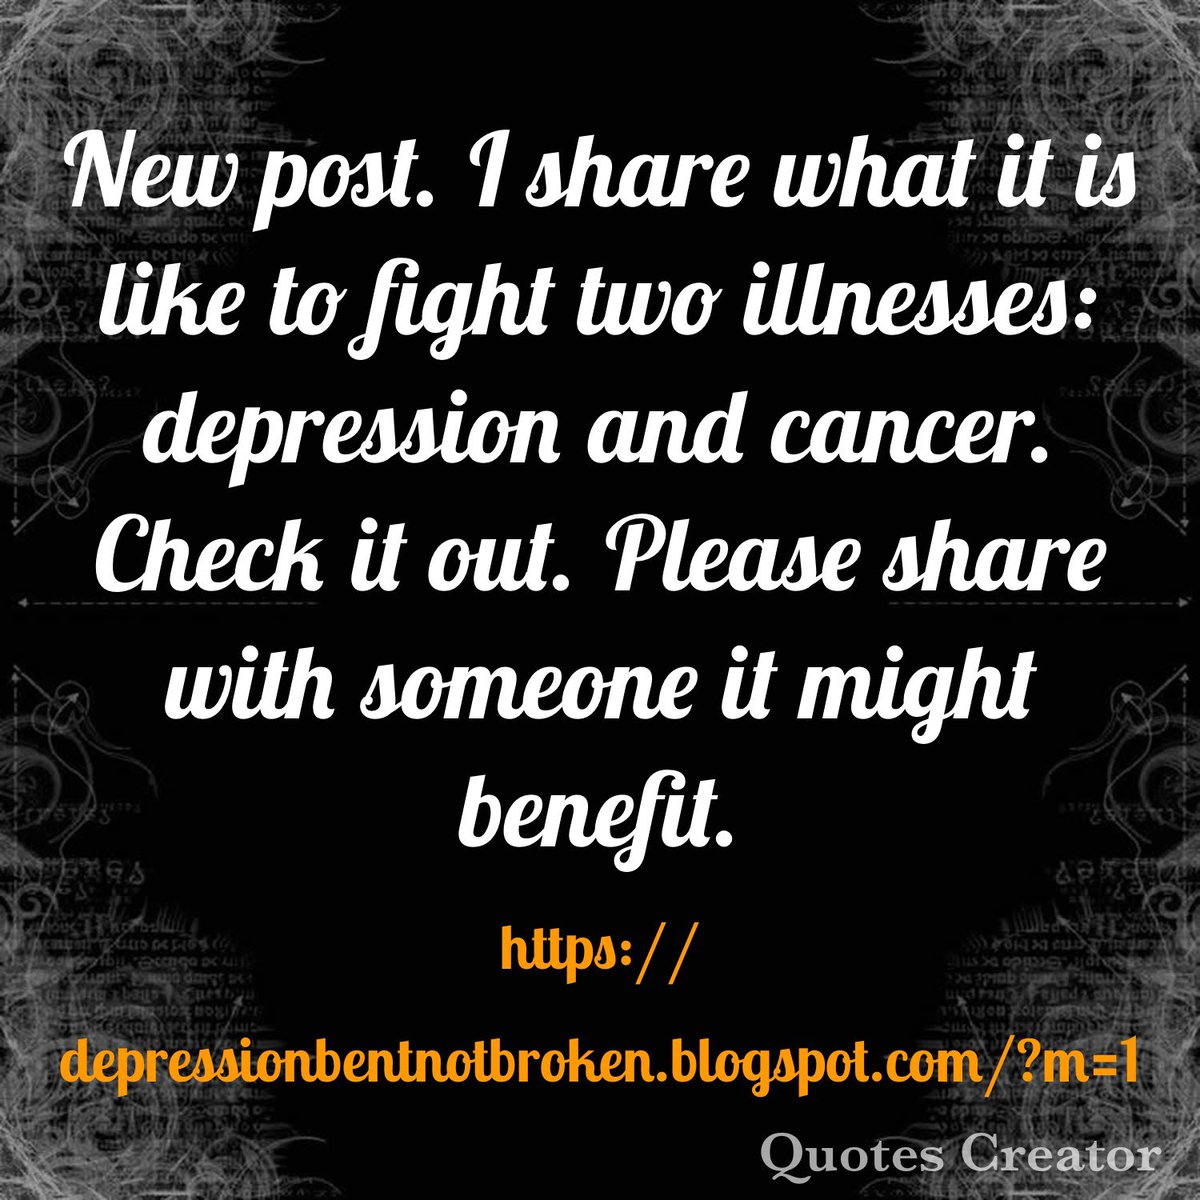 In today’s post I discuss living with two illnesses: #depression and #cancer. It is difficult, but I am fighting. Please share my blog with anyone it might benefit. 
depressionbentnotbroken.blogspot.com/?m=1
#mentalillness #mentalhealth #breastcancer #battlingcancer #writingtoheal